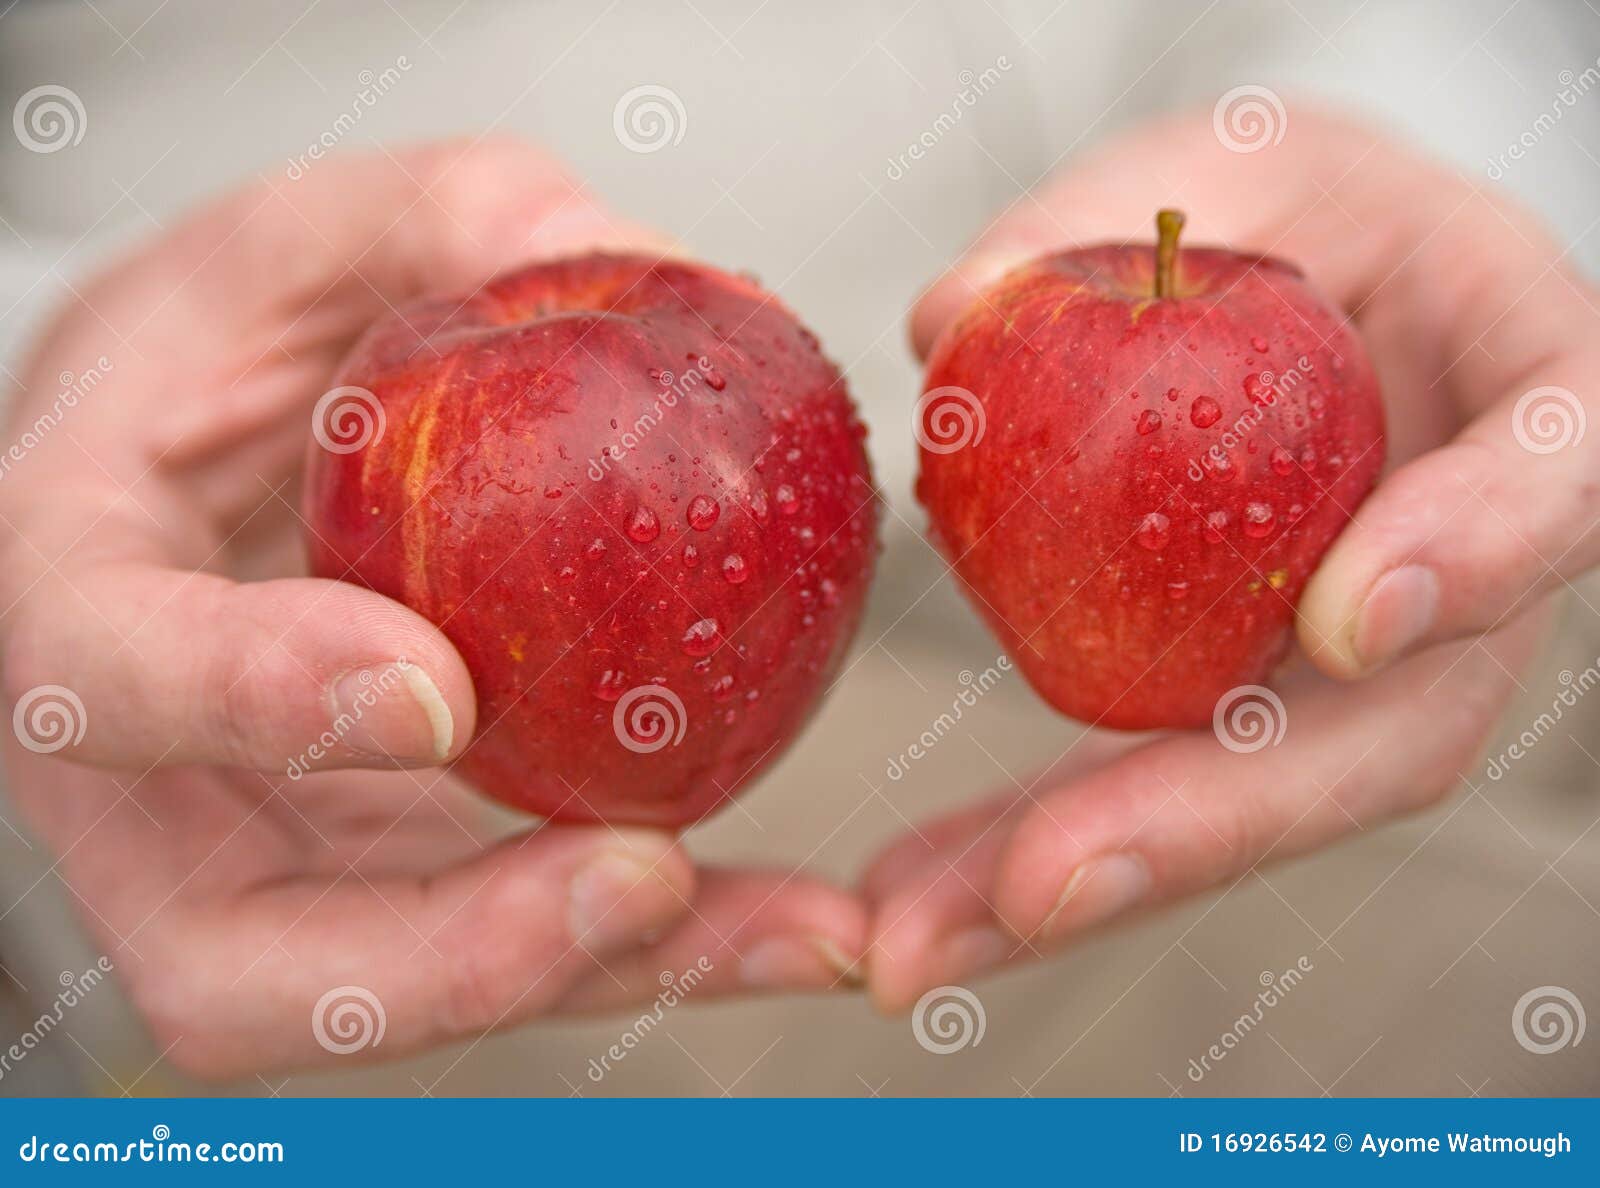 rosy red apples: size matters.